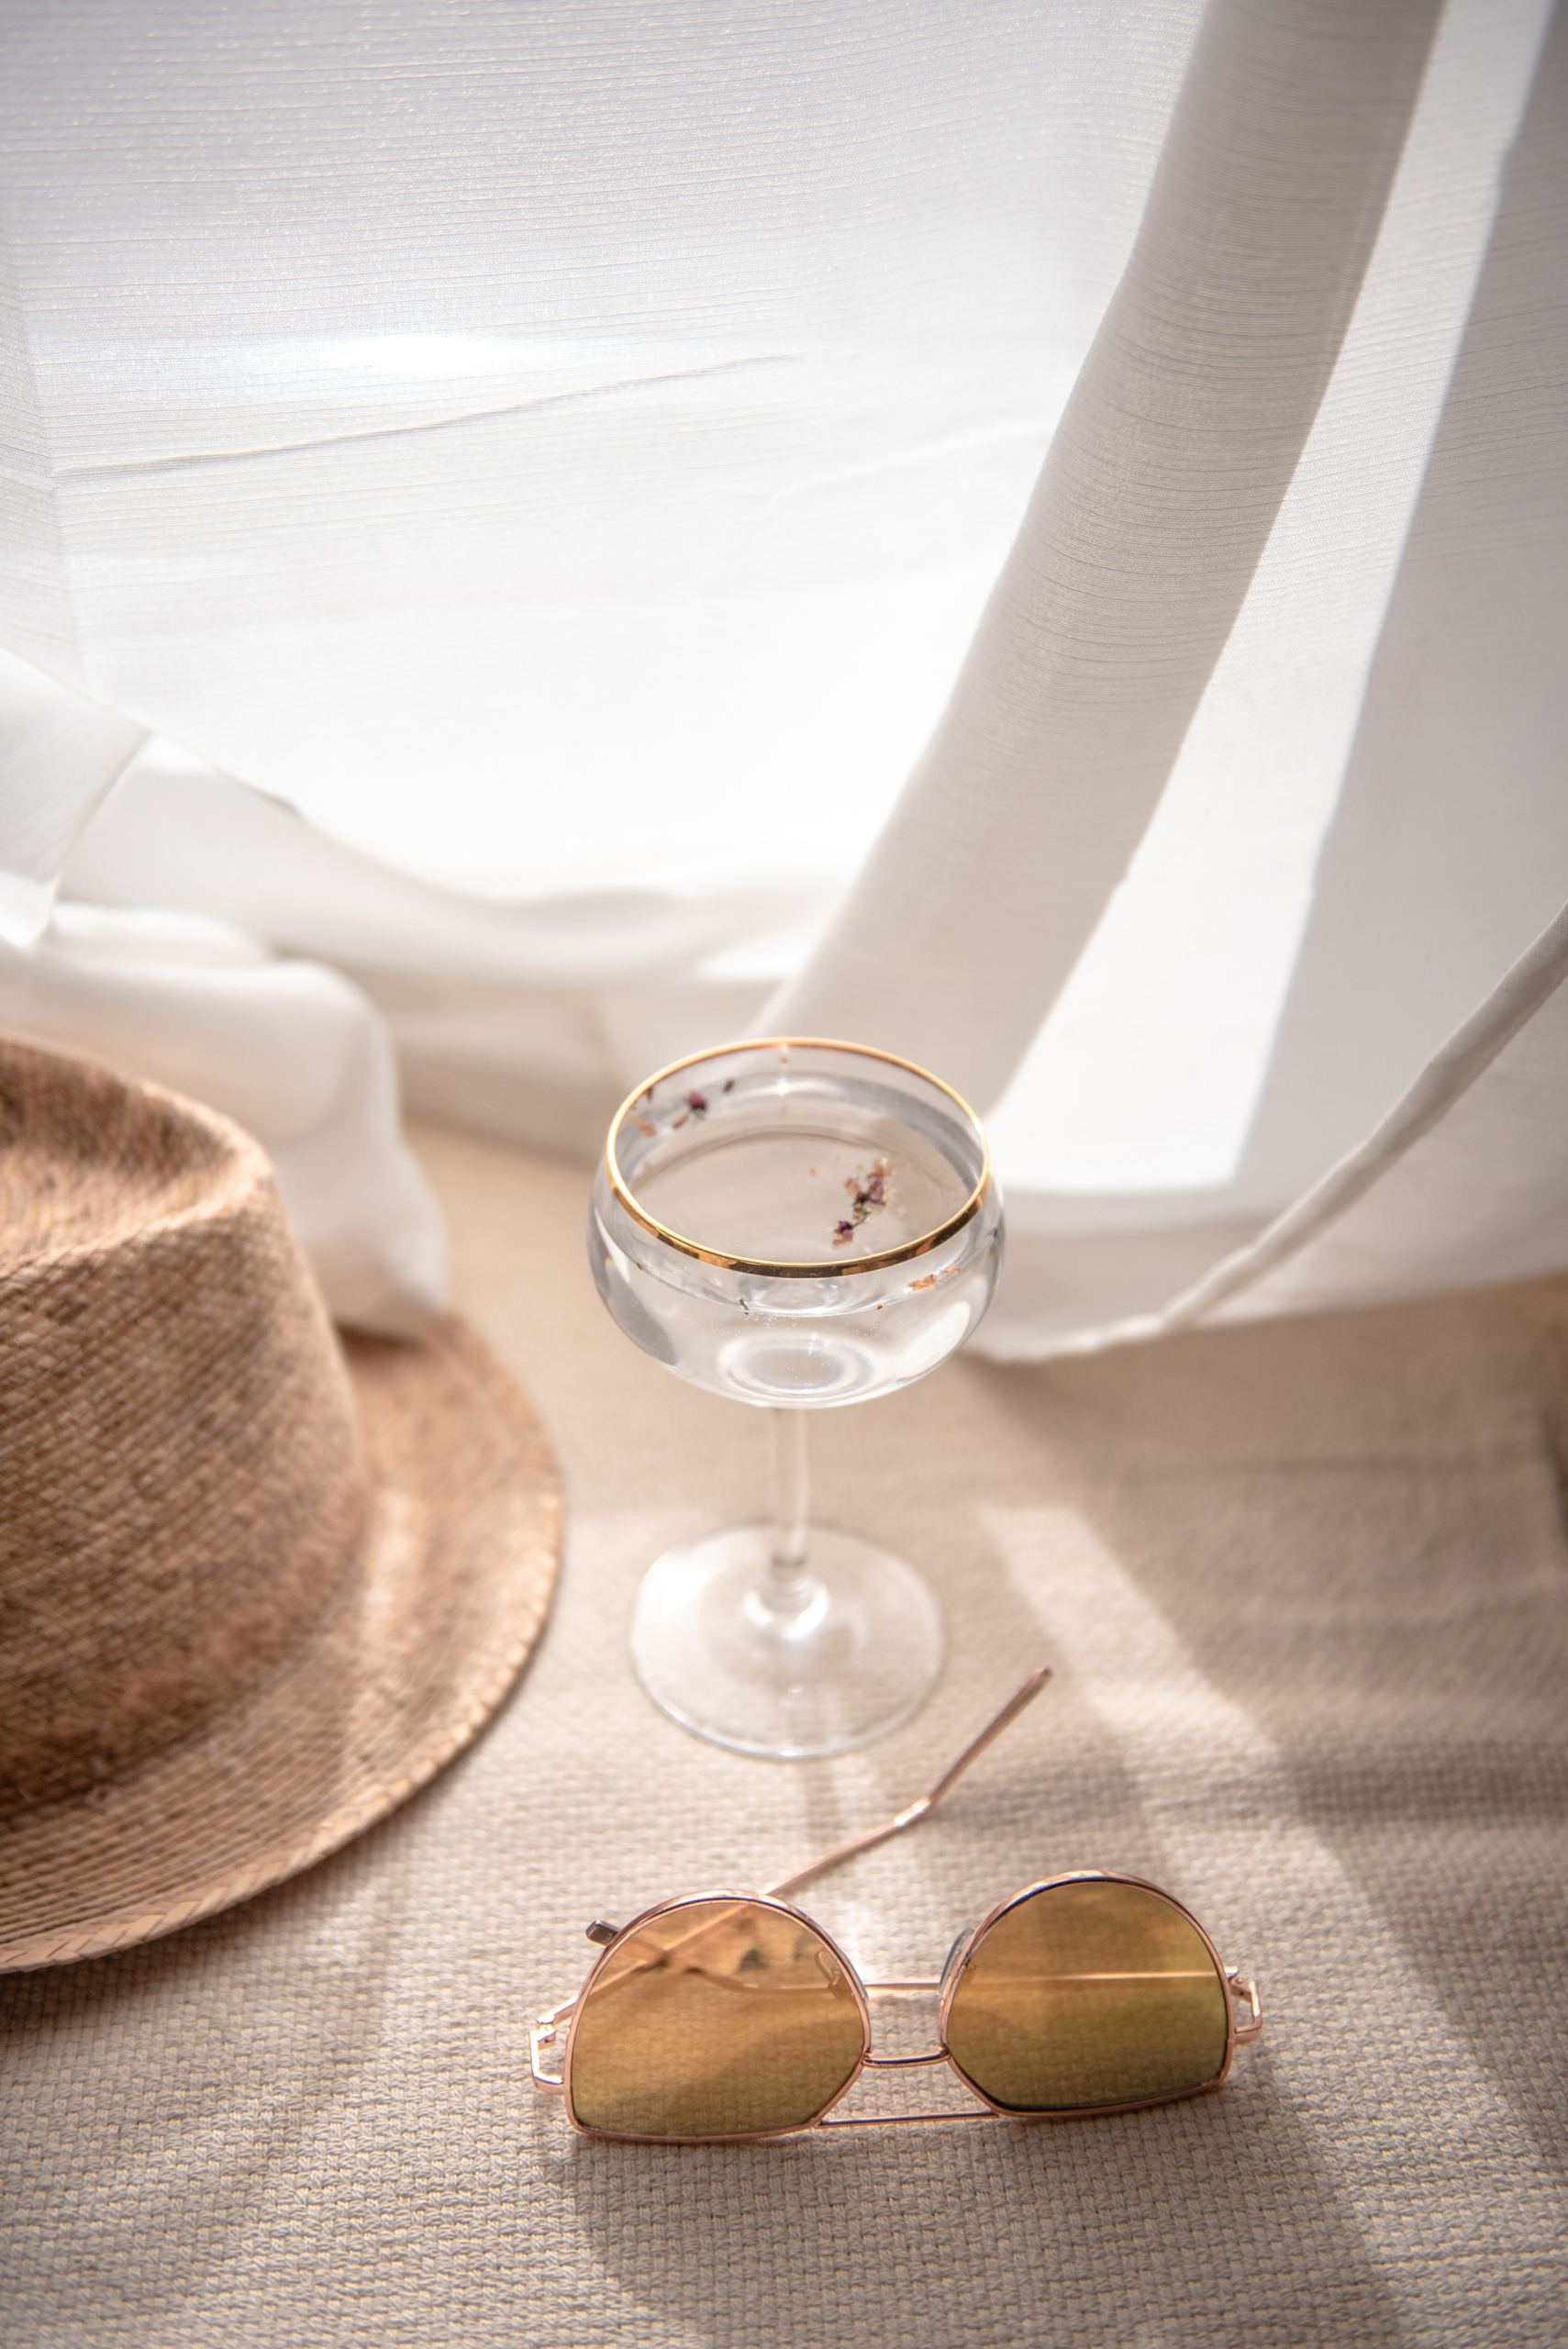 vacation scene with straw hat, champagne glass, and sunglasses on a beach blanket